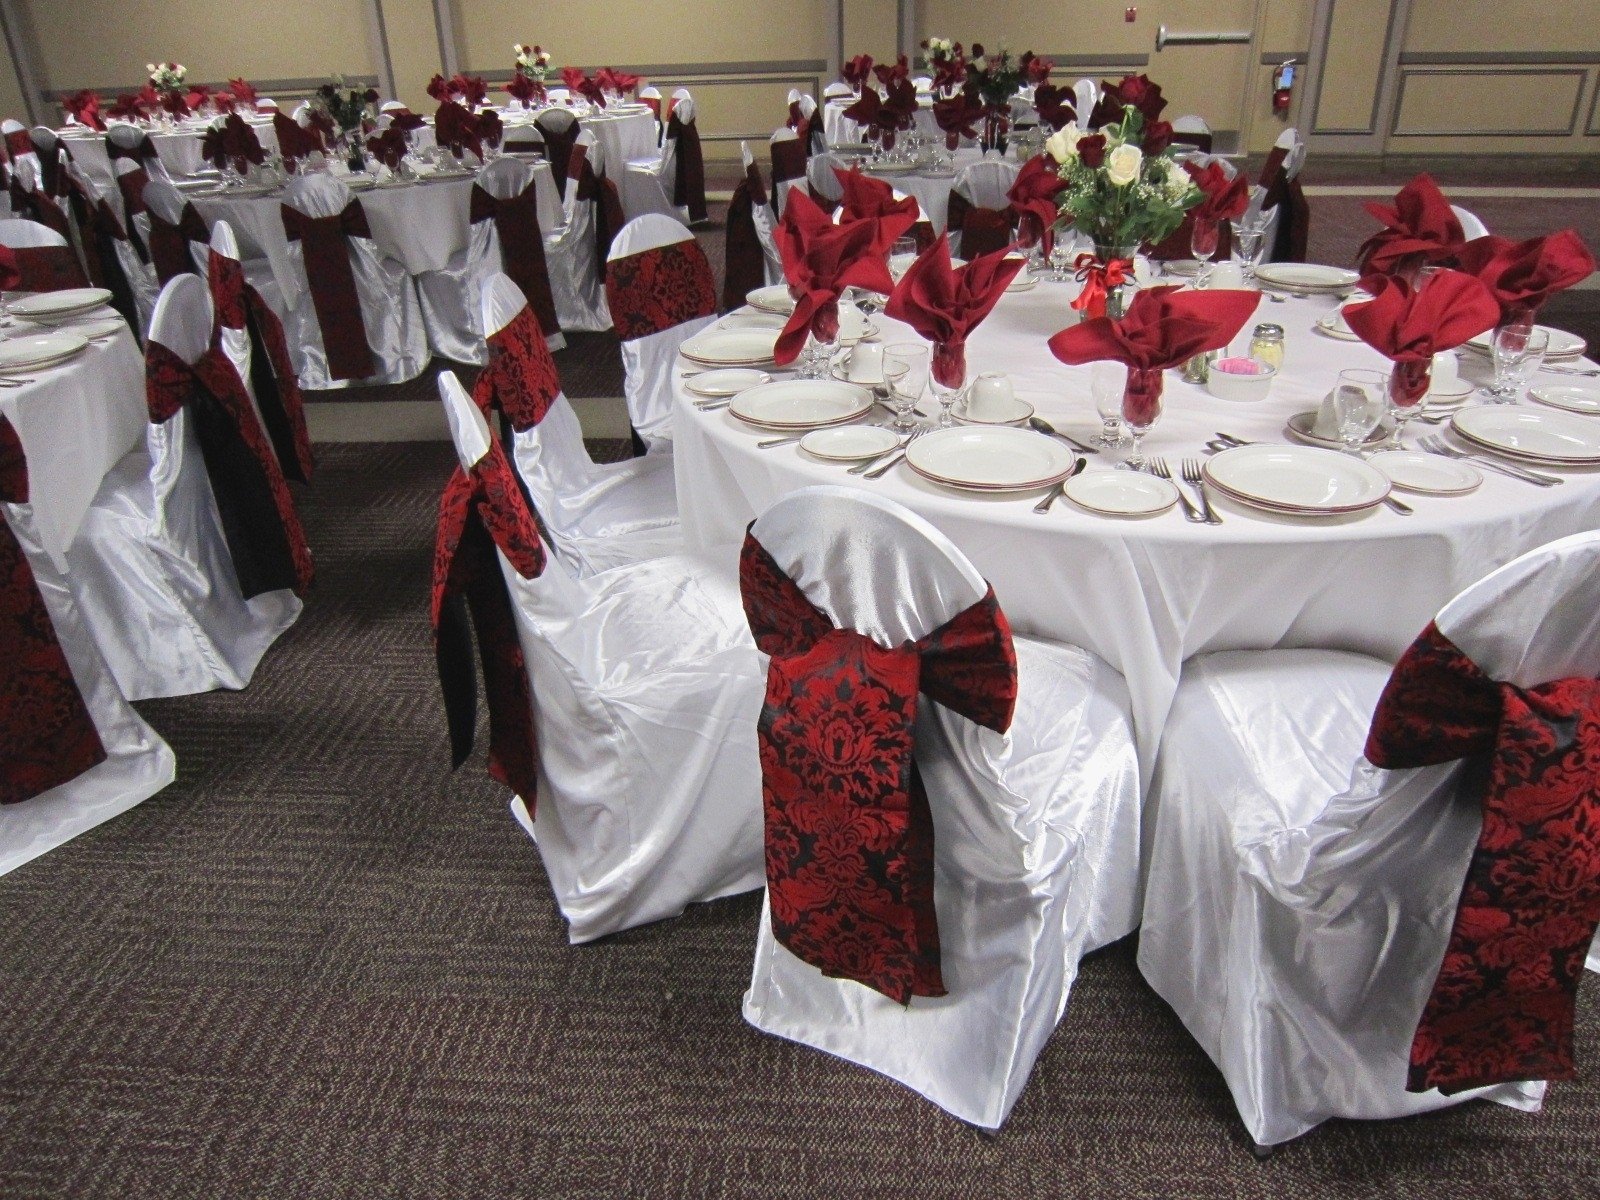 10 Nice Black White And Red Wedding Ideas red and white wedding decorations beautiful black white and red 2022